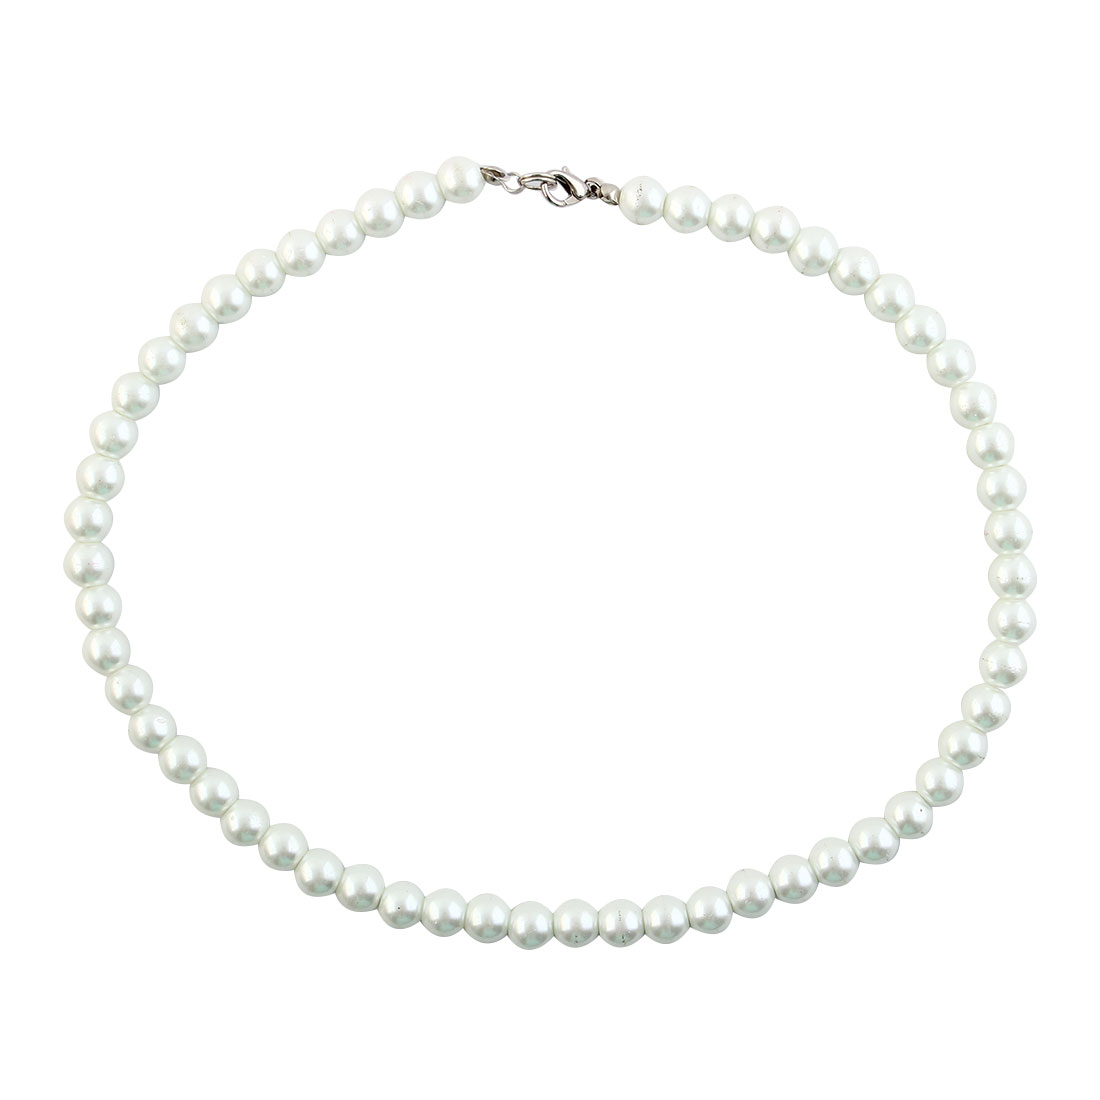 Unique Bargains White Jewelry Faux Pearl Round Beaded Necklace for Lady